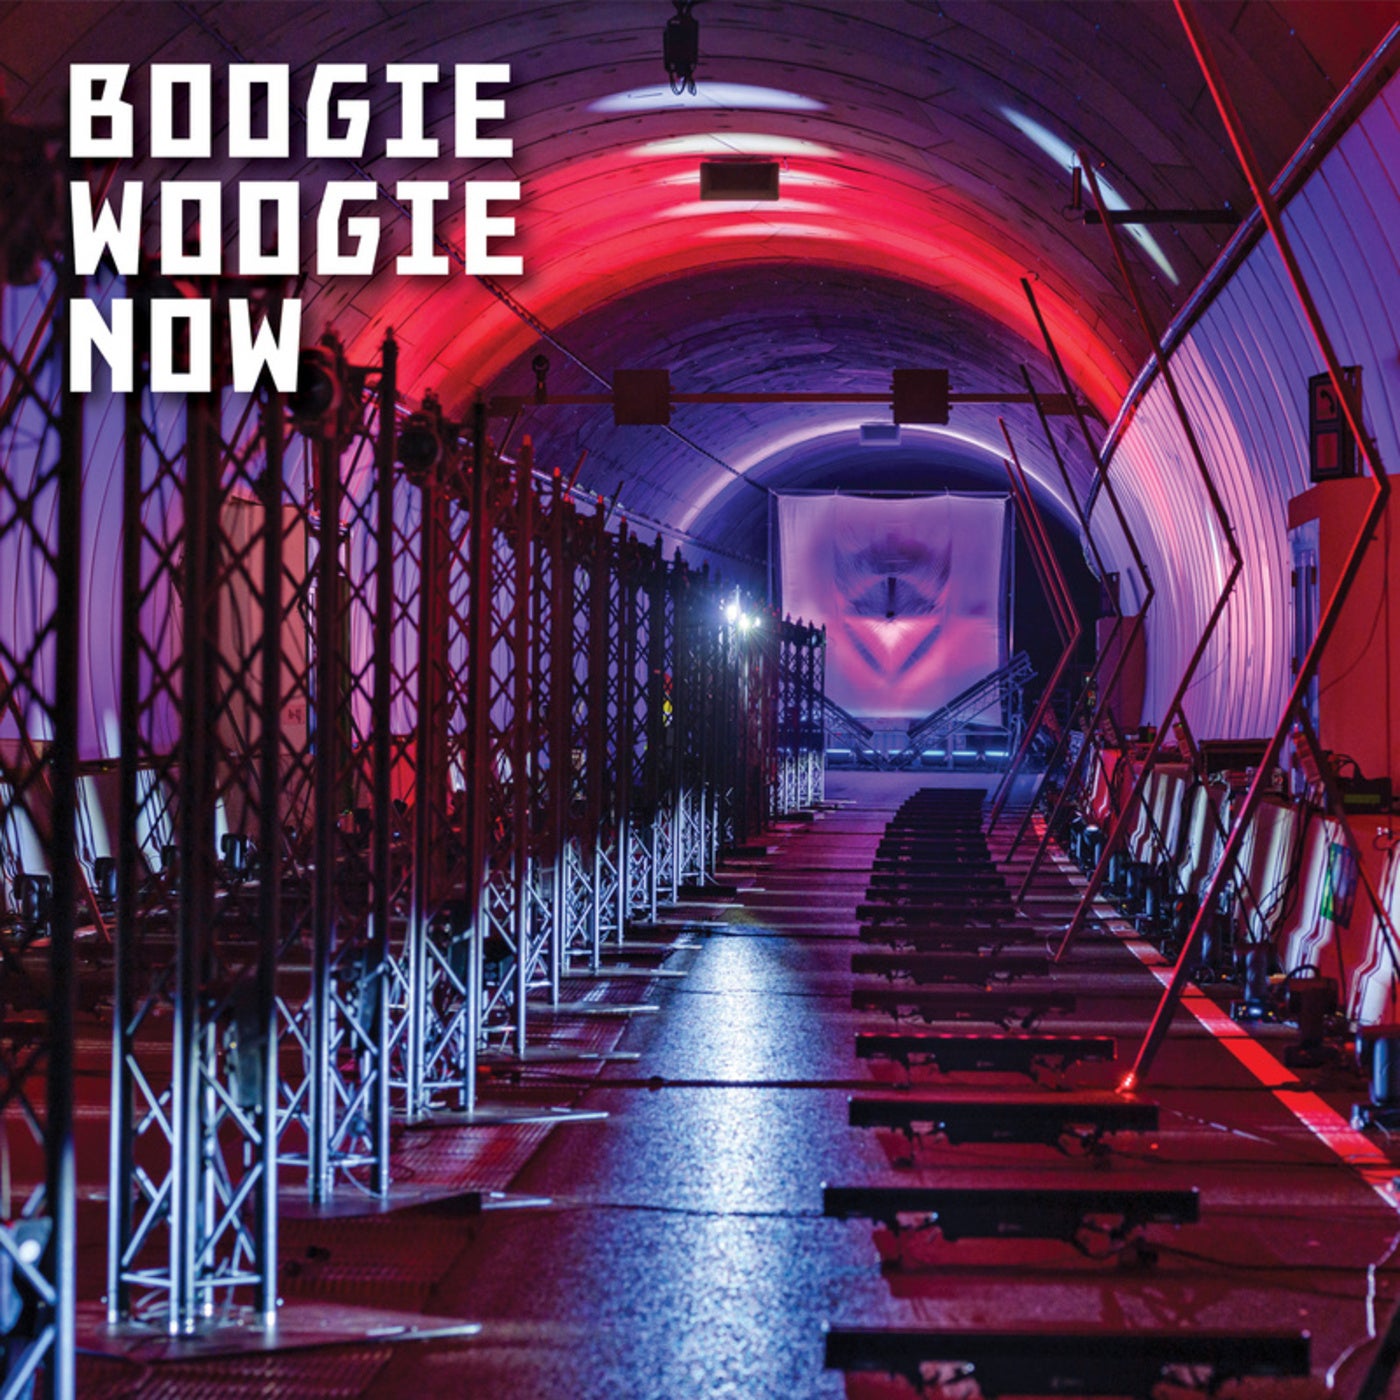 The Amazing Run in the Victory Boogie Woogie Tunnel